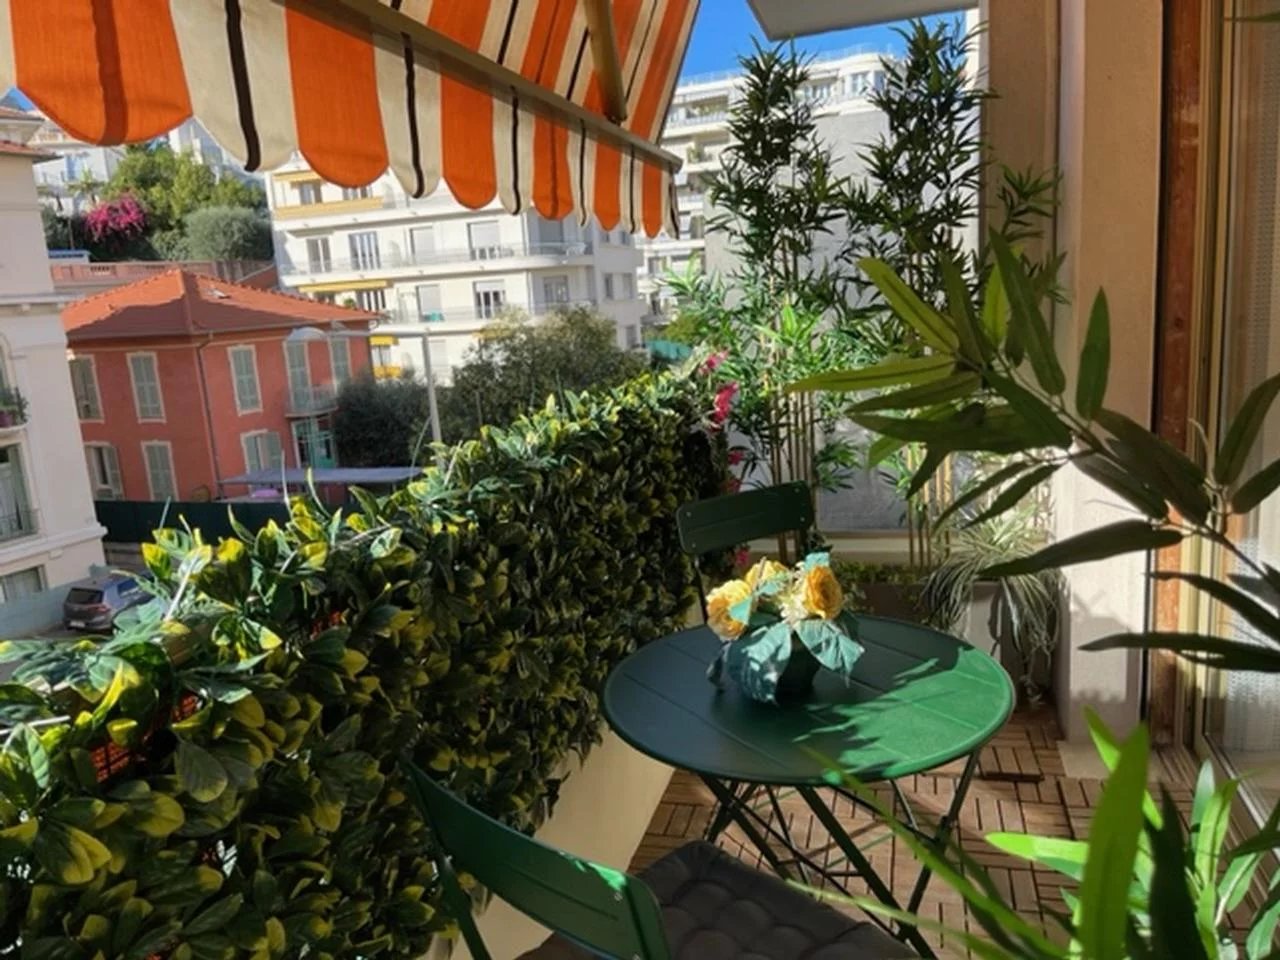 Appartement  2 Rooms 40.5m2  for sale   298 000 €